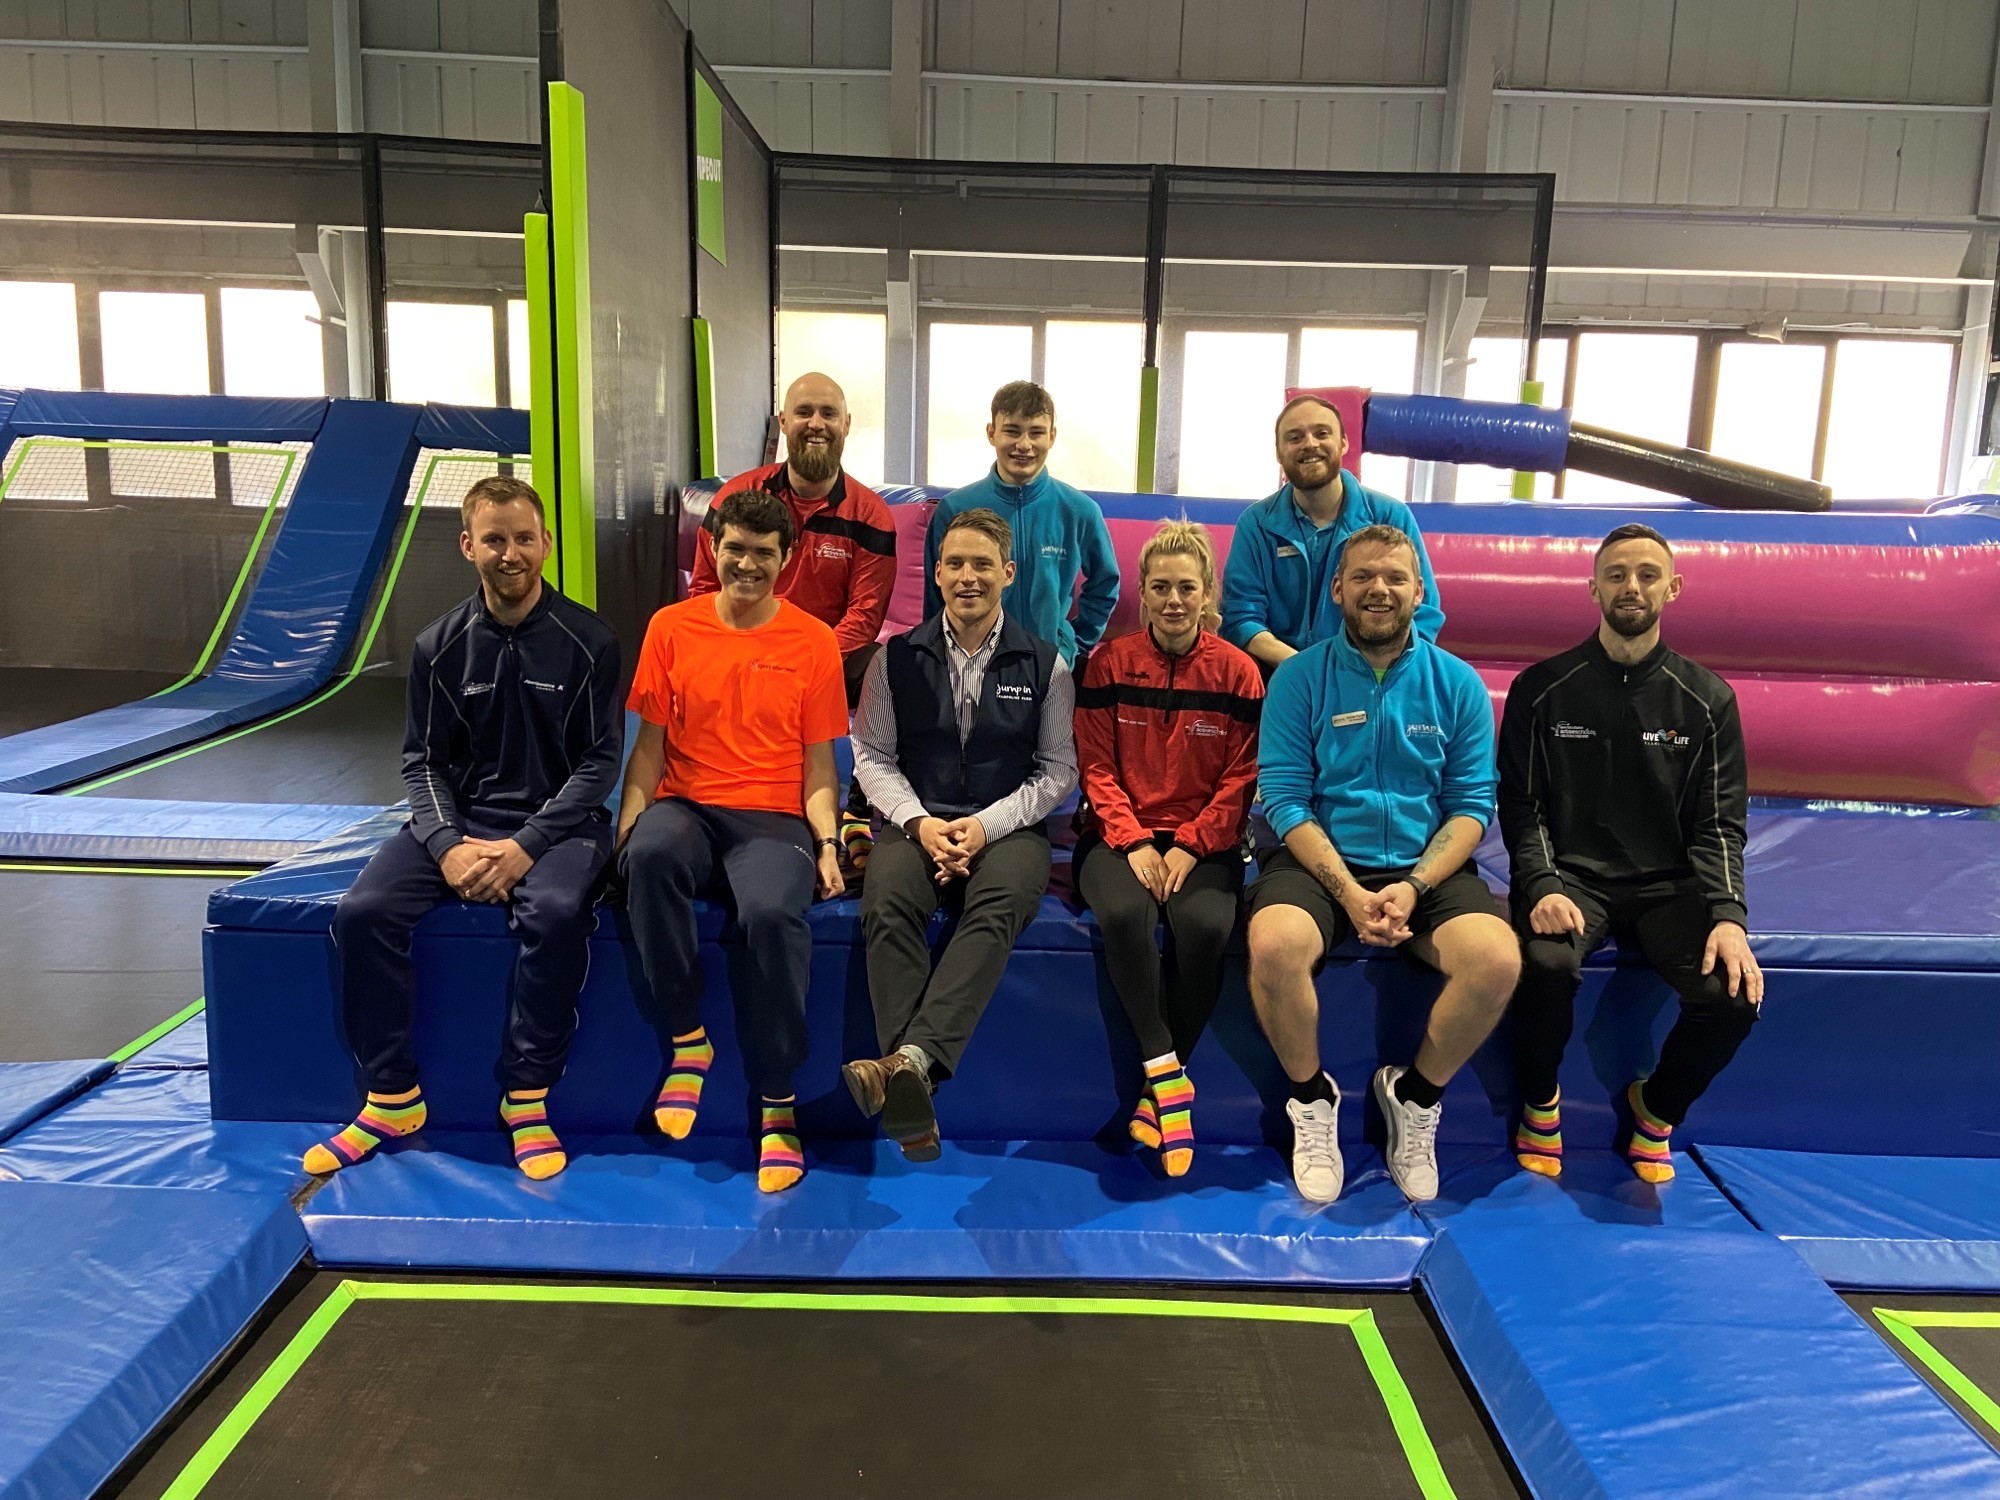 A picture of staff who helped at a Trampoline and Rebound festival.